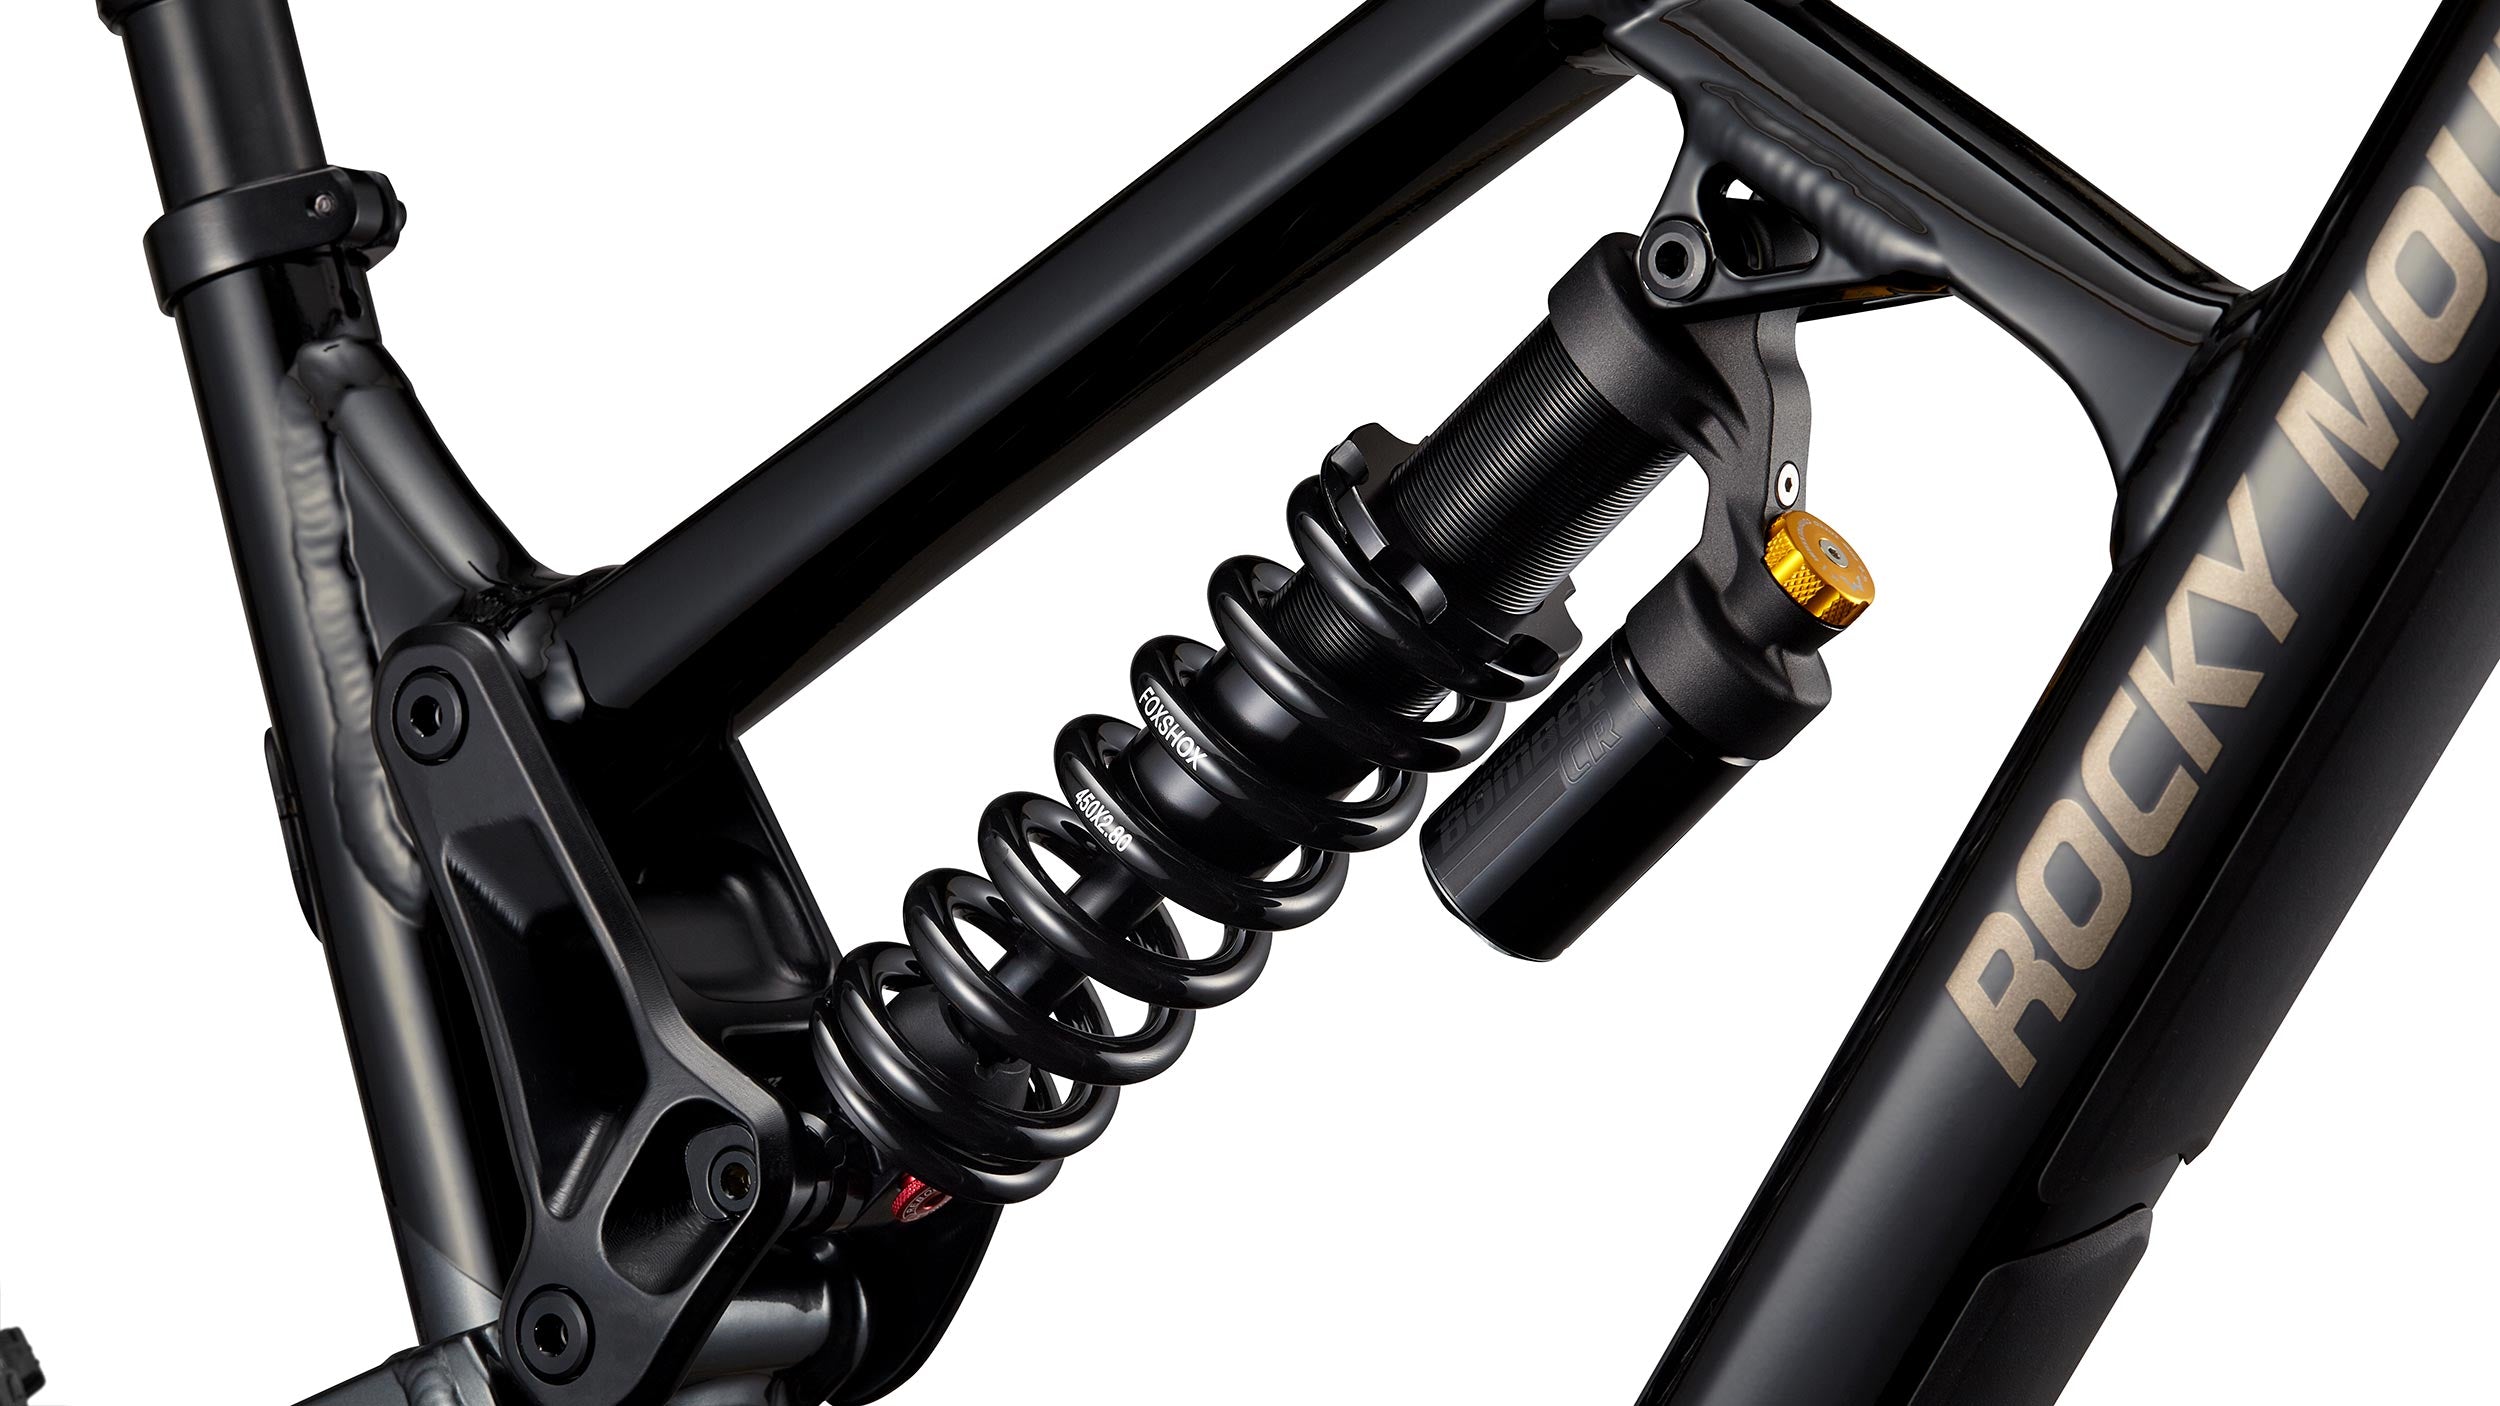 _caption_The Marzocchi Bomber CR is a durable and easy to adjust shock known for its reliability. It provides a smooth and responsive ride, making it suitable for various trail conditions.